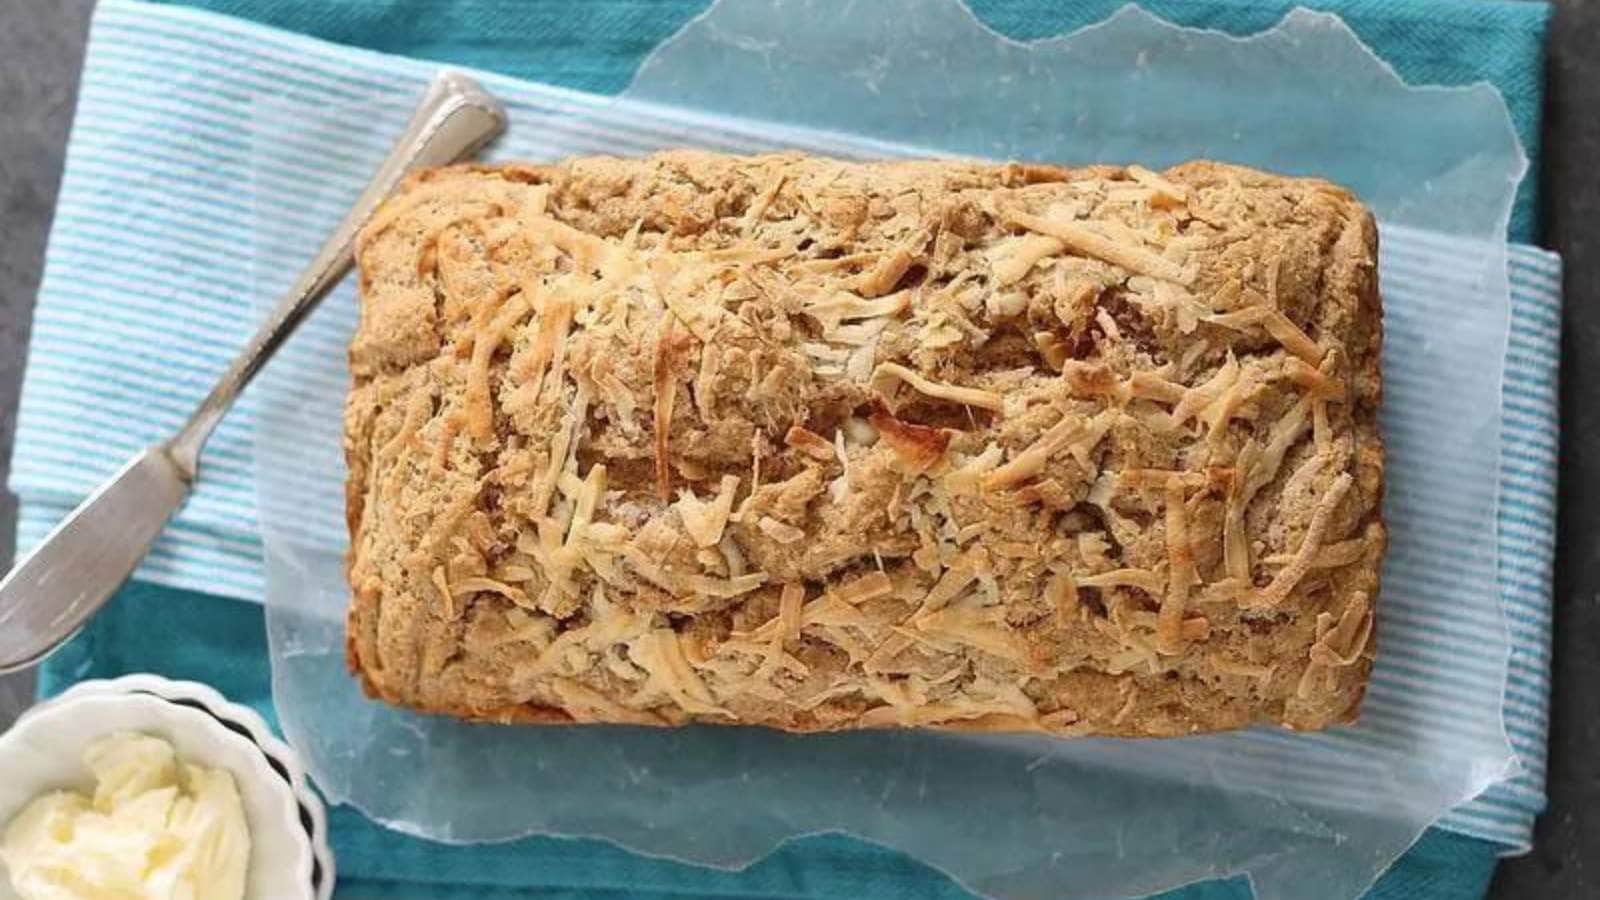 Maple Parmesan Beer Bread recipe by Running To The Kitchen.